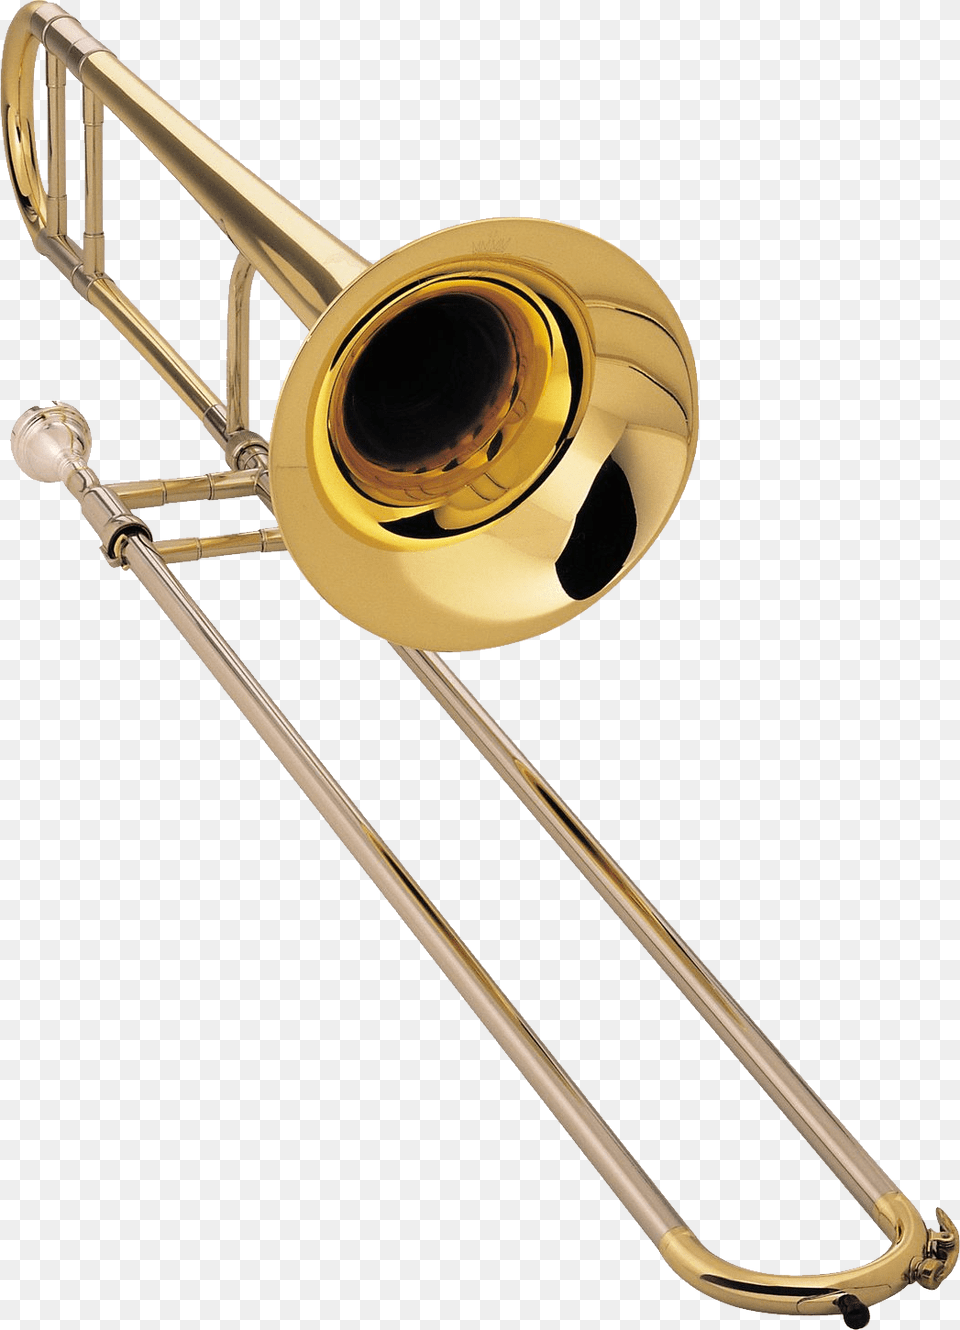 Trombone Instrument With Definition, Musical Instrument, Brass Section, Blade, Dagger Free Transparent Png